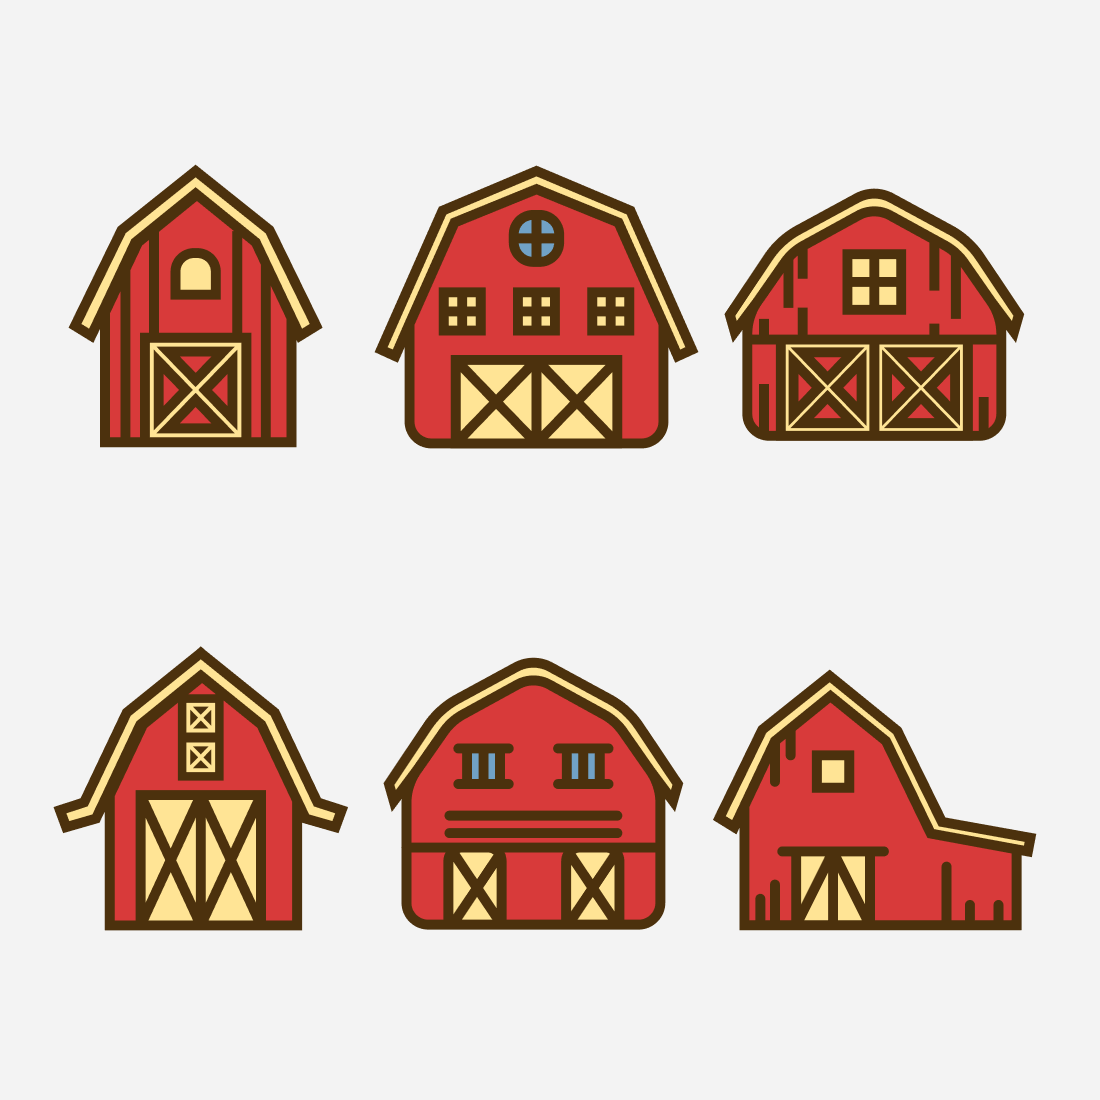 Six barns with sloping roofs made in different styles.